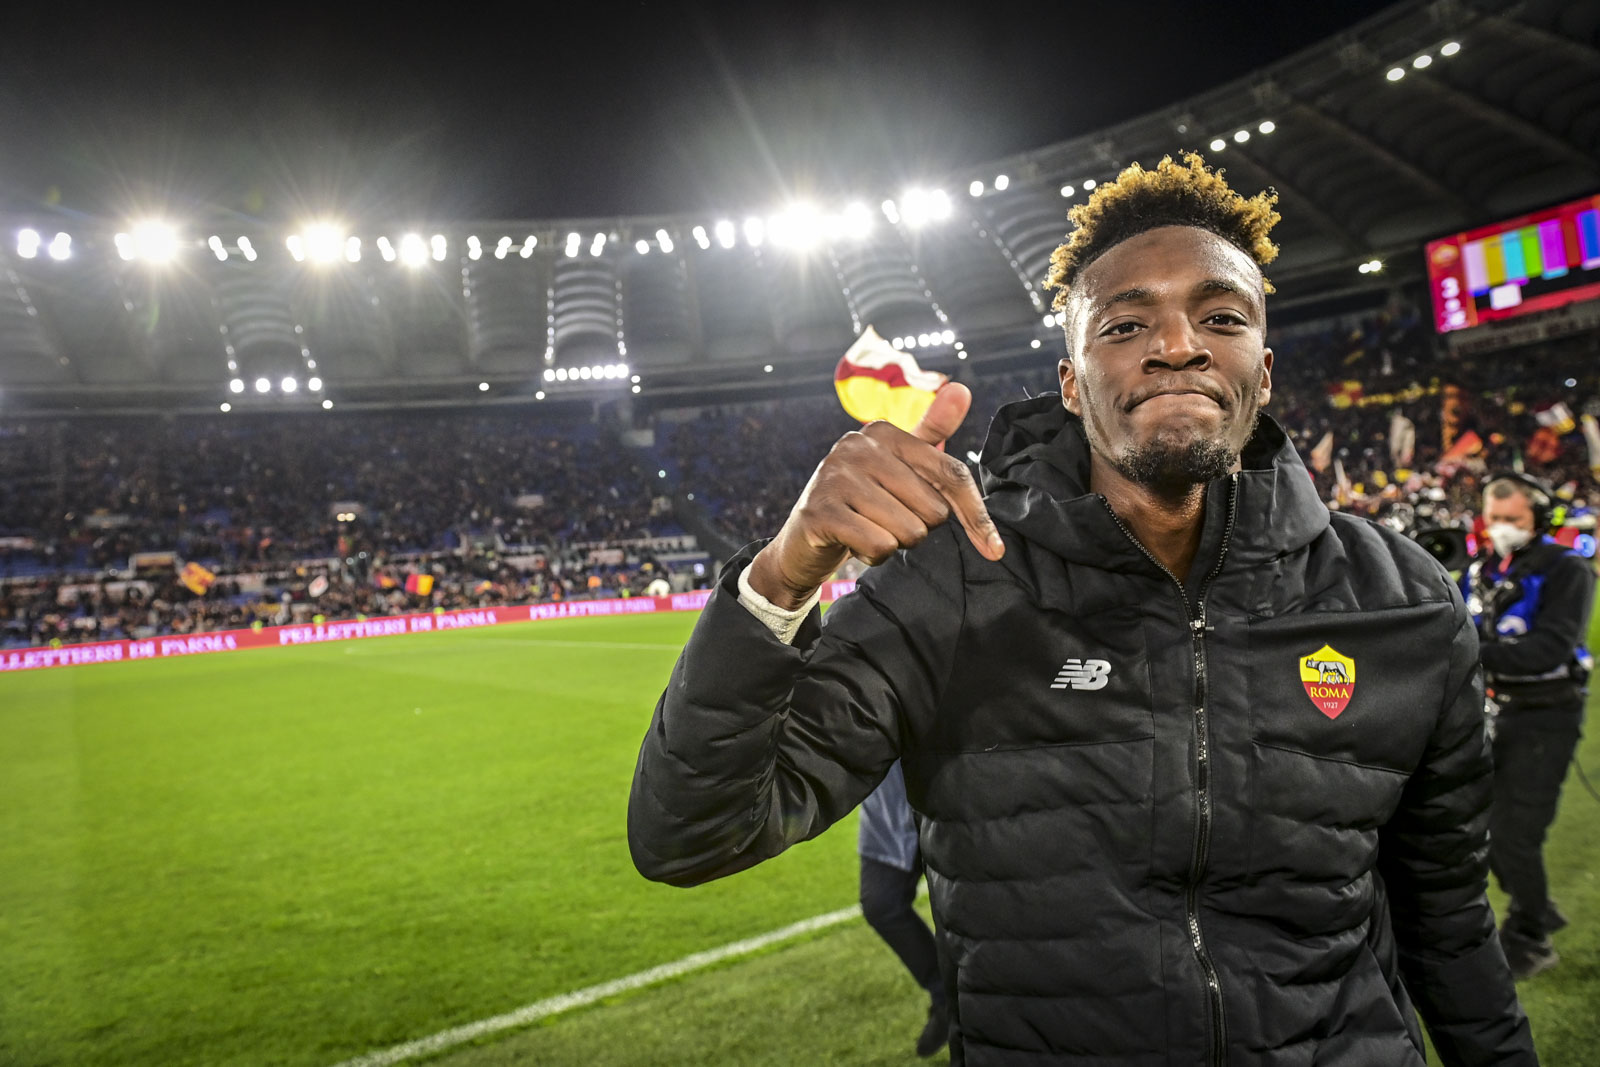 We’ll see what future holds but my heart is at AS Roma, claims Tammy Abraham